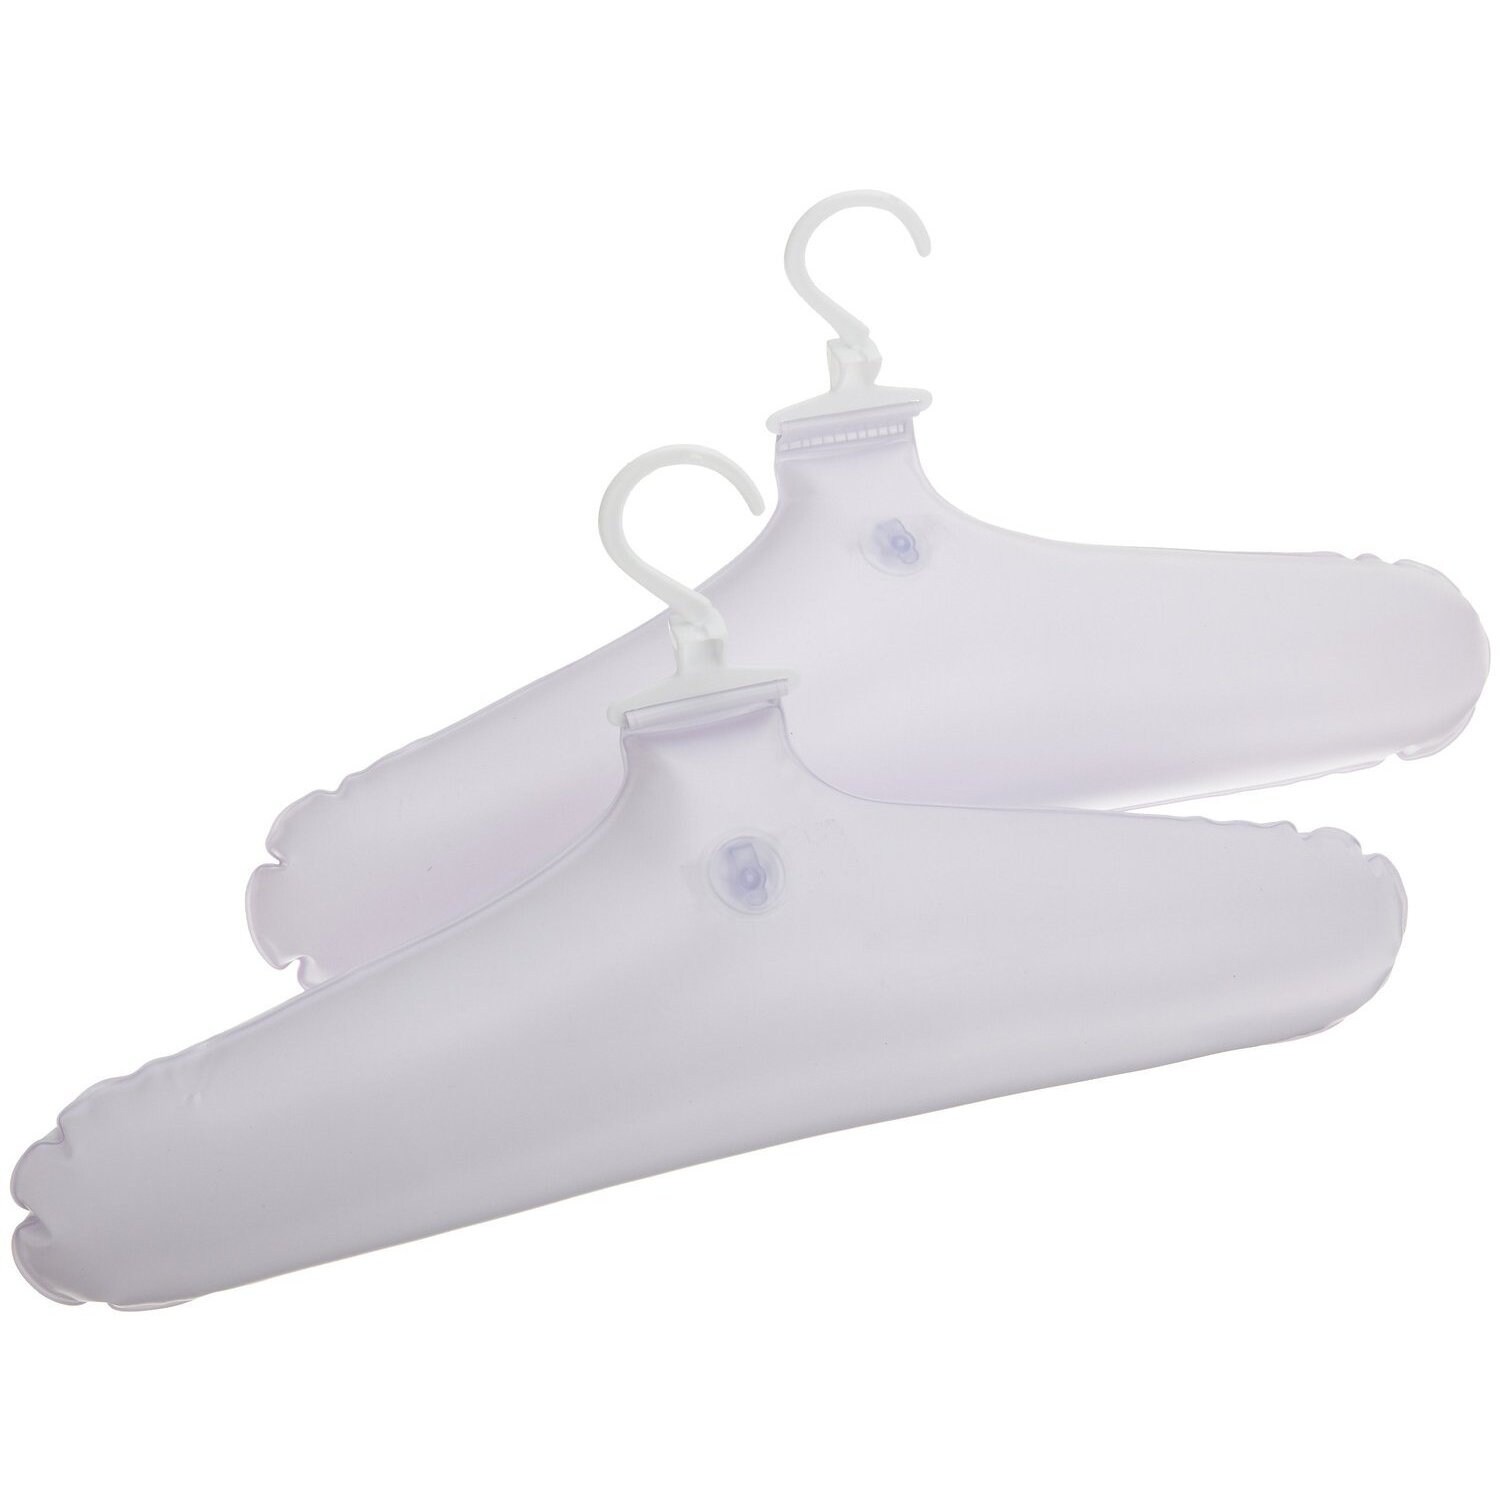 Inflatable Travel Clothes Hanger - Lightweight Easy-On Closets